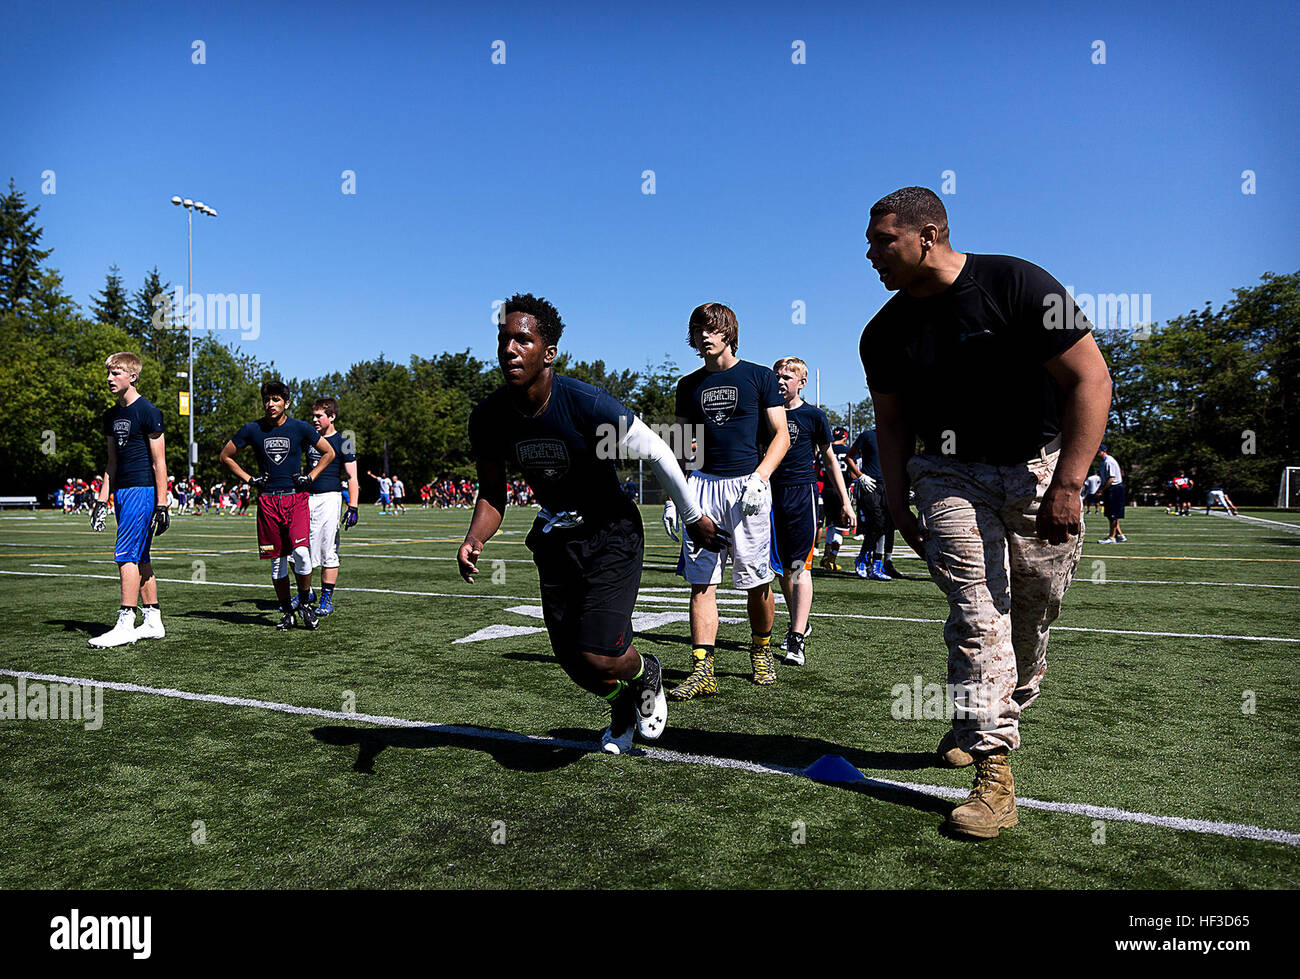 Sgt. Bryan Mack, a Marine recruiter in Bellevue, Washington, motivates high school football players during a Semper Fidelis All-American football camp at Hazen High School in Renton, Washington, June 14, 2015. More than 160 players from across Washington State experienced the one-day camp, led by former NFL coaches, local high school coaches and Marines. The camp, which focused on leadership and honor both on and off the field, leads up to the Semper Fidelis All-American Bowl game, which will be played in California in January 2016. (U.S. Marine Corps photo by Sgt. Reece Lodder) Seattle Marine Stock Photo